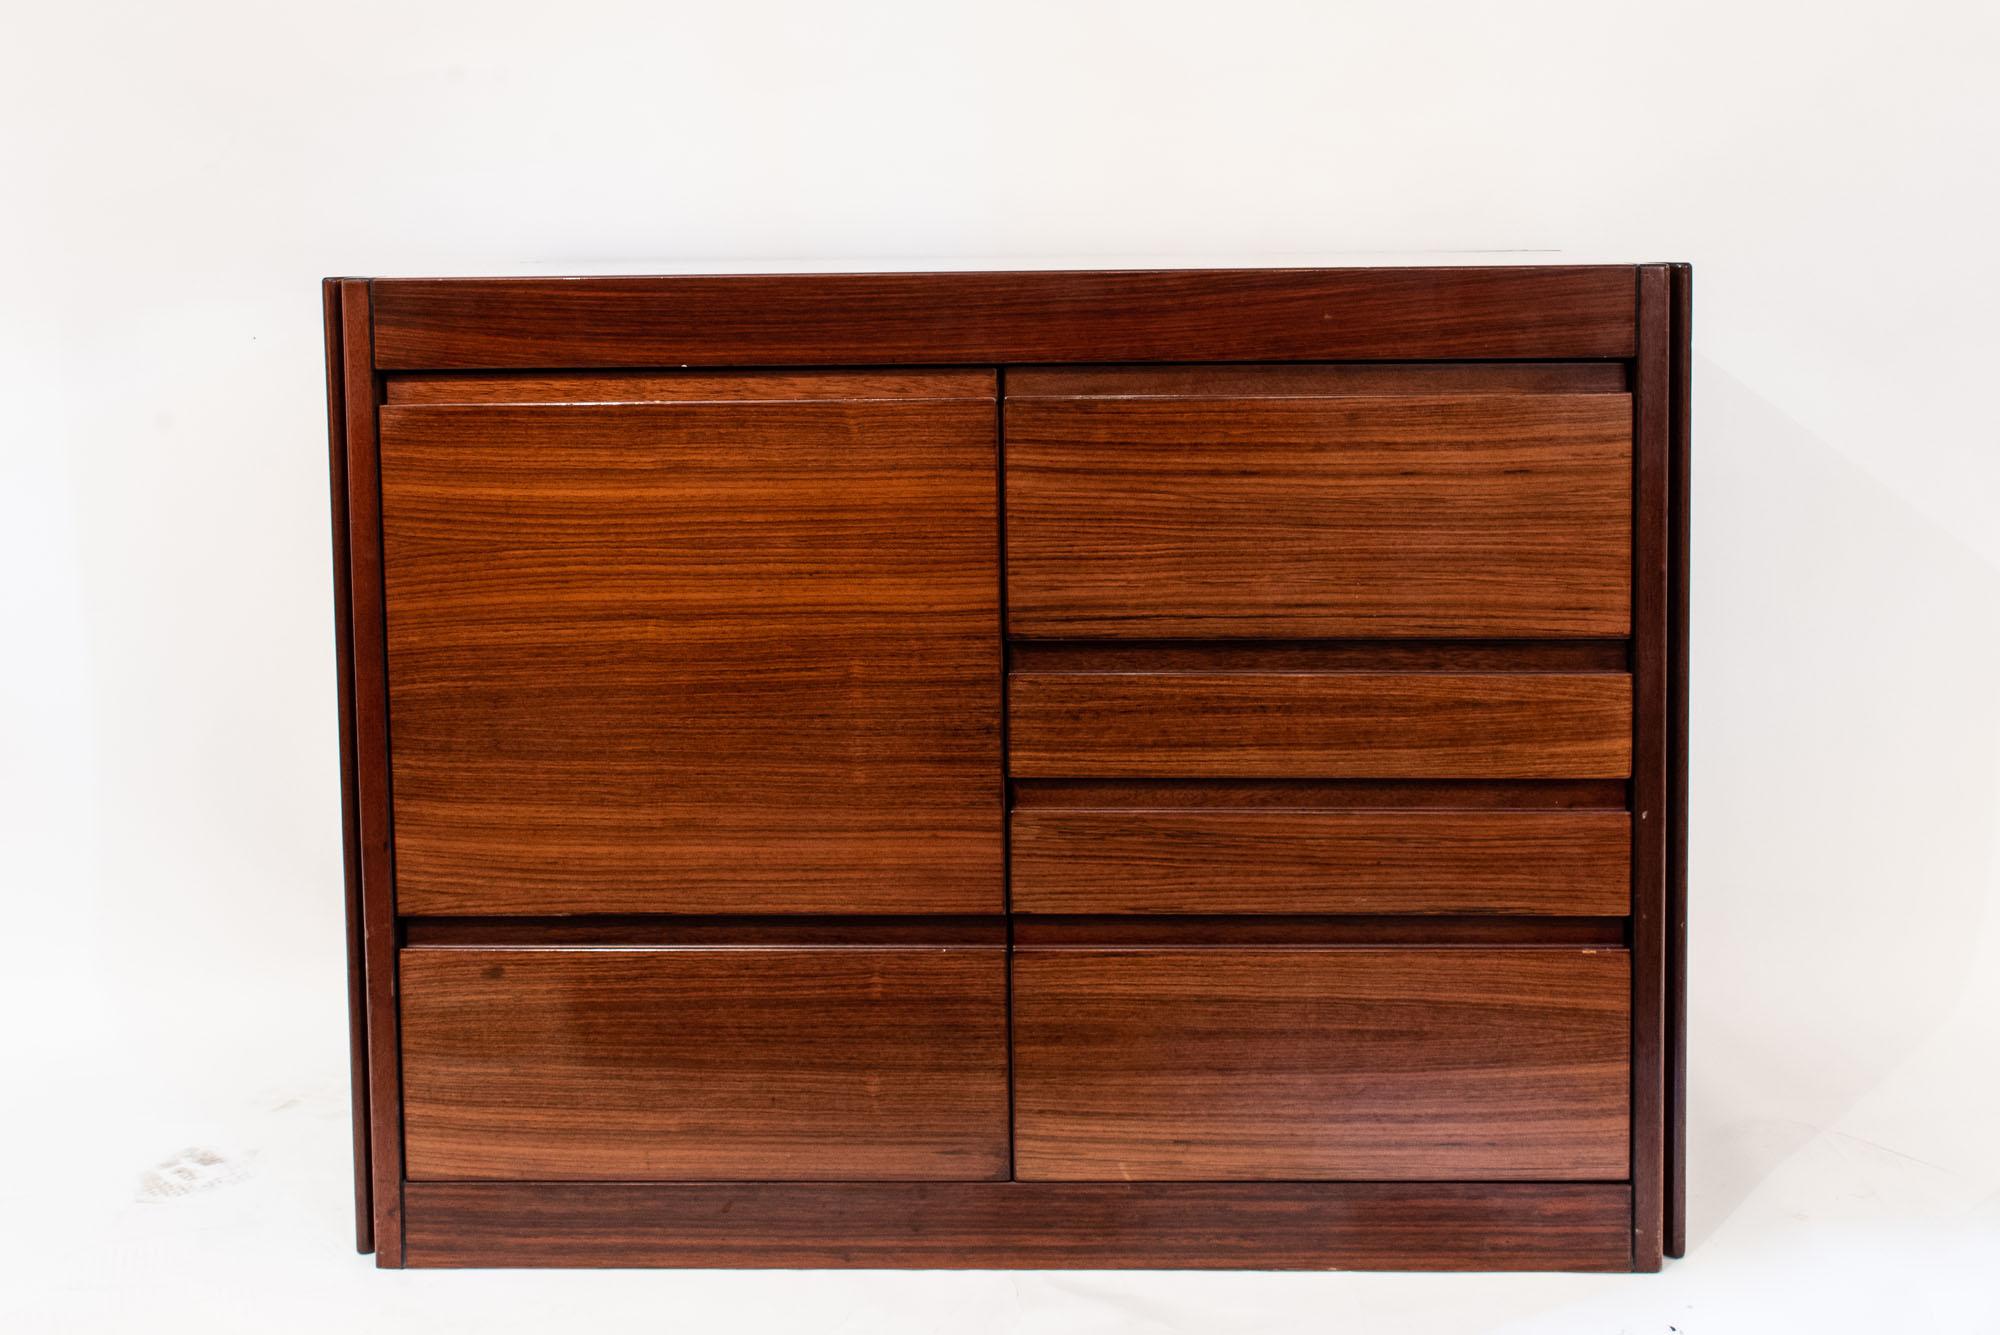 Angelo Mangiarotti, sideboard, dry bar,
wood and marble,
circa 1970, France.
Measures: Height 70 cm, width 95 cm, depth 48 cm.